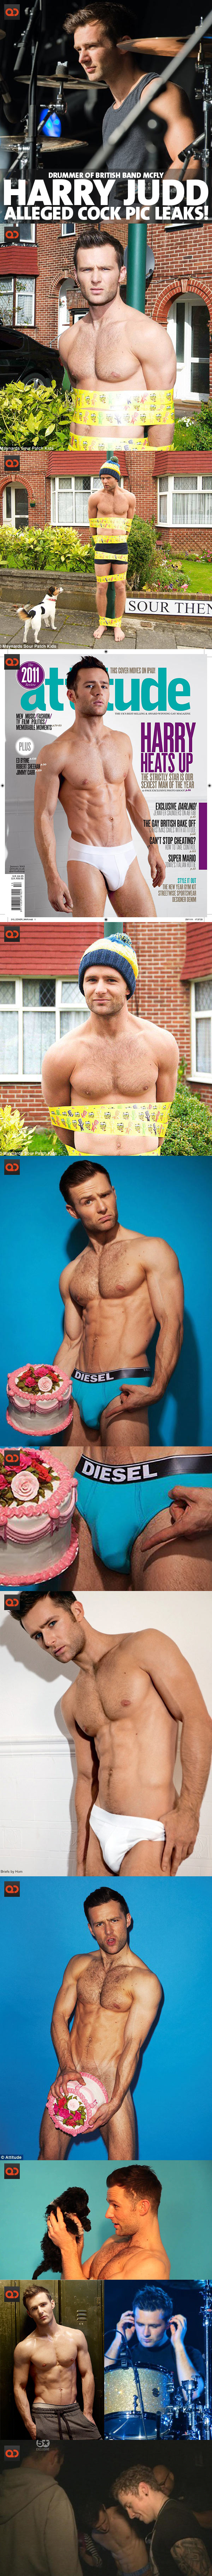 qc-harry_judd_mcfly_alleged_leaked_cock_pic-collage01